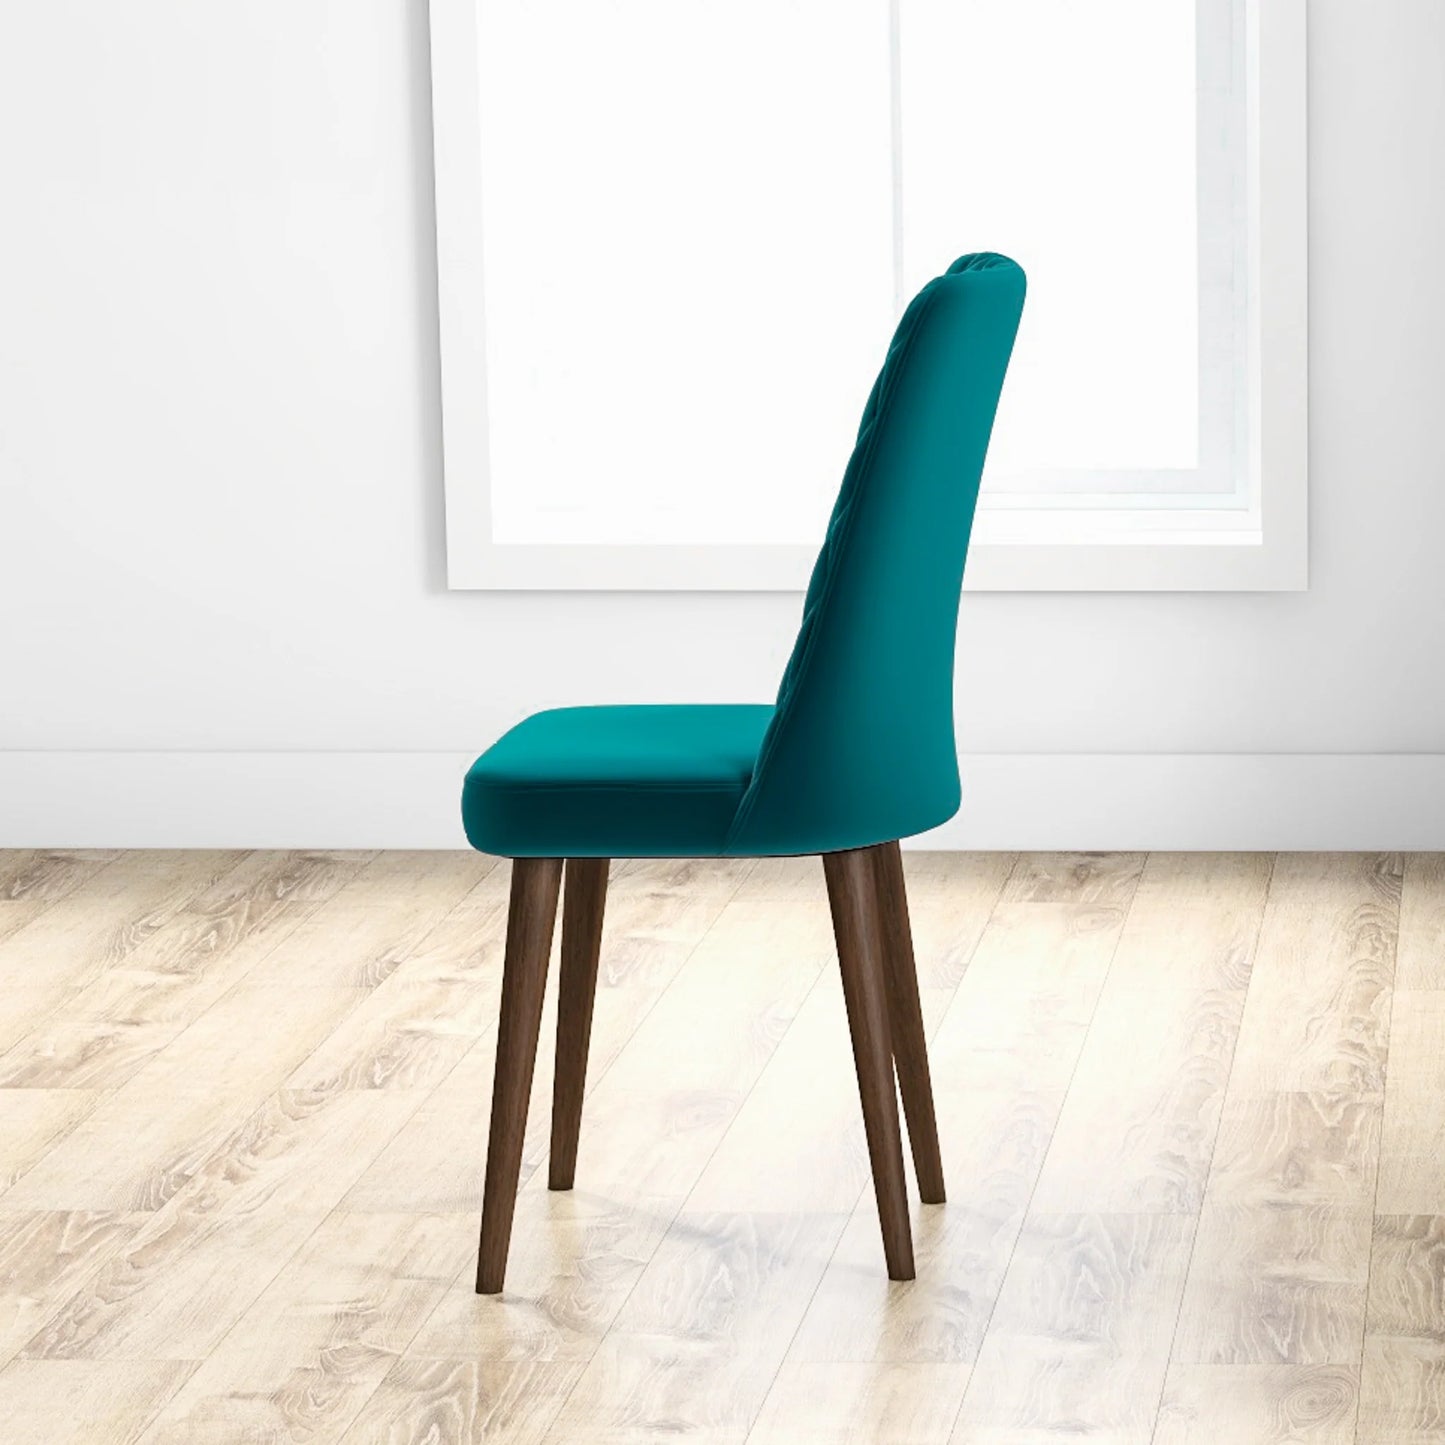 Evette Mid Century Modern Teal Dining Chair